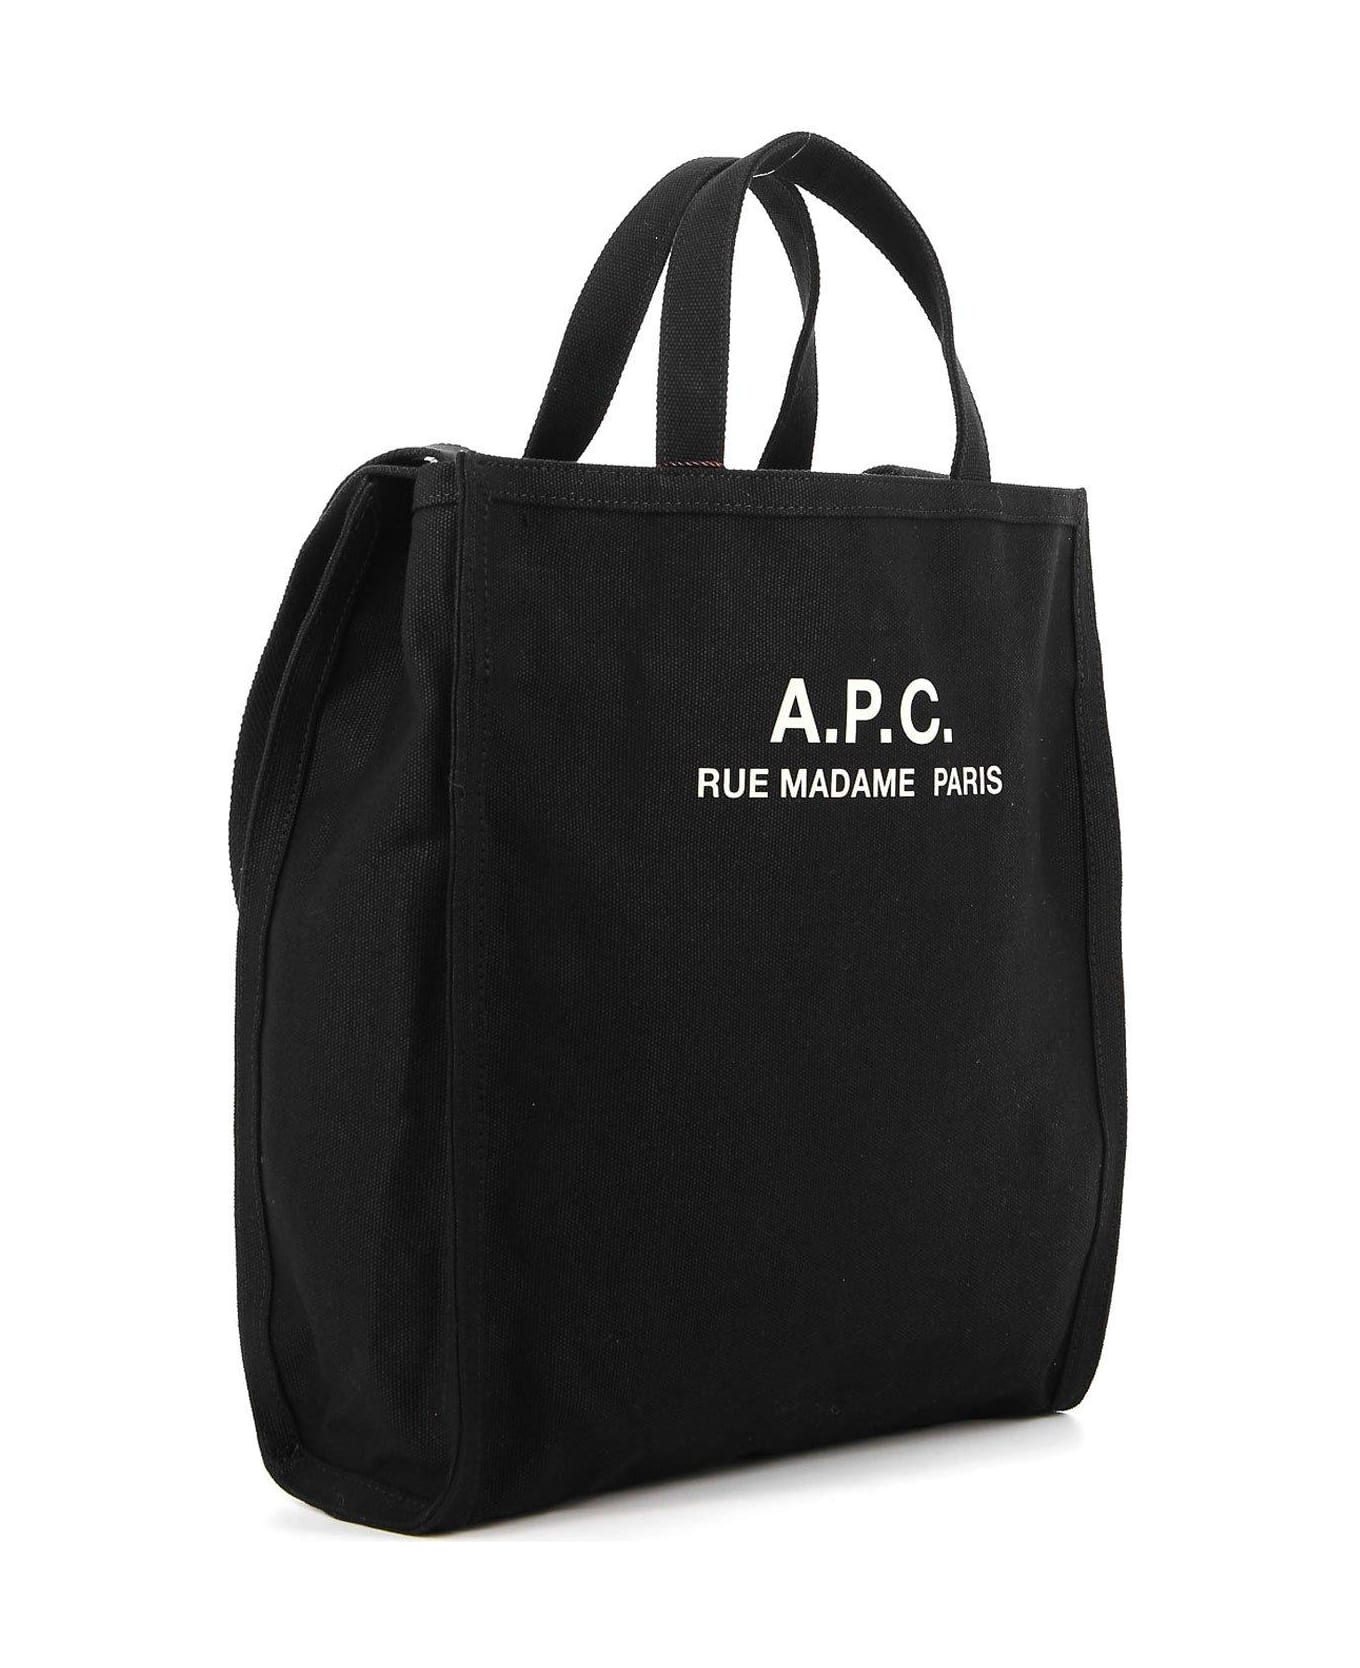 A.P.C. Recuperation Canvas Shopping Bag - LZZ トートバッグ